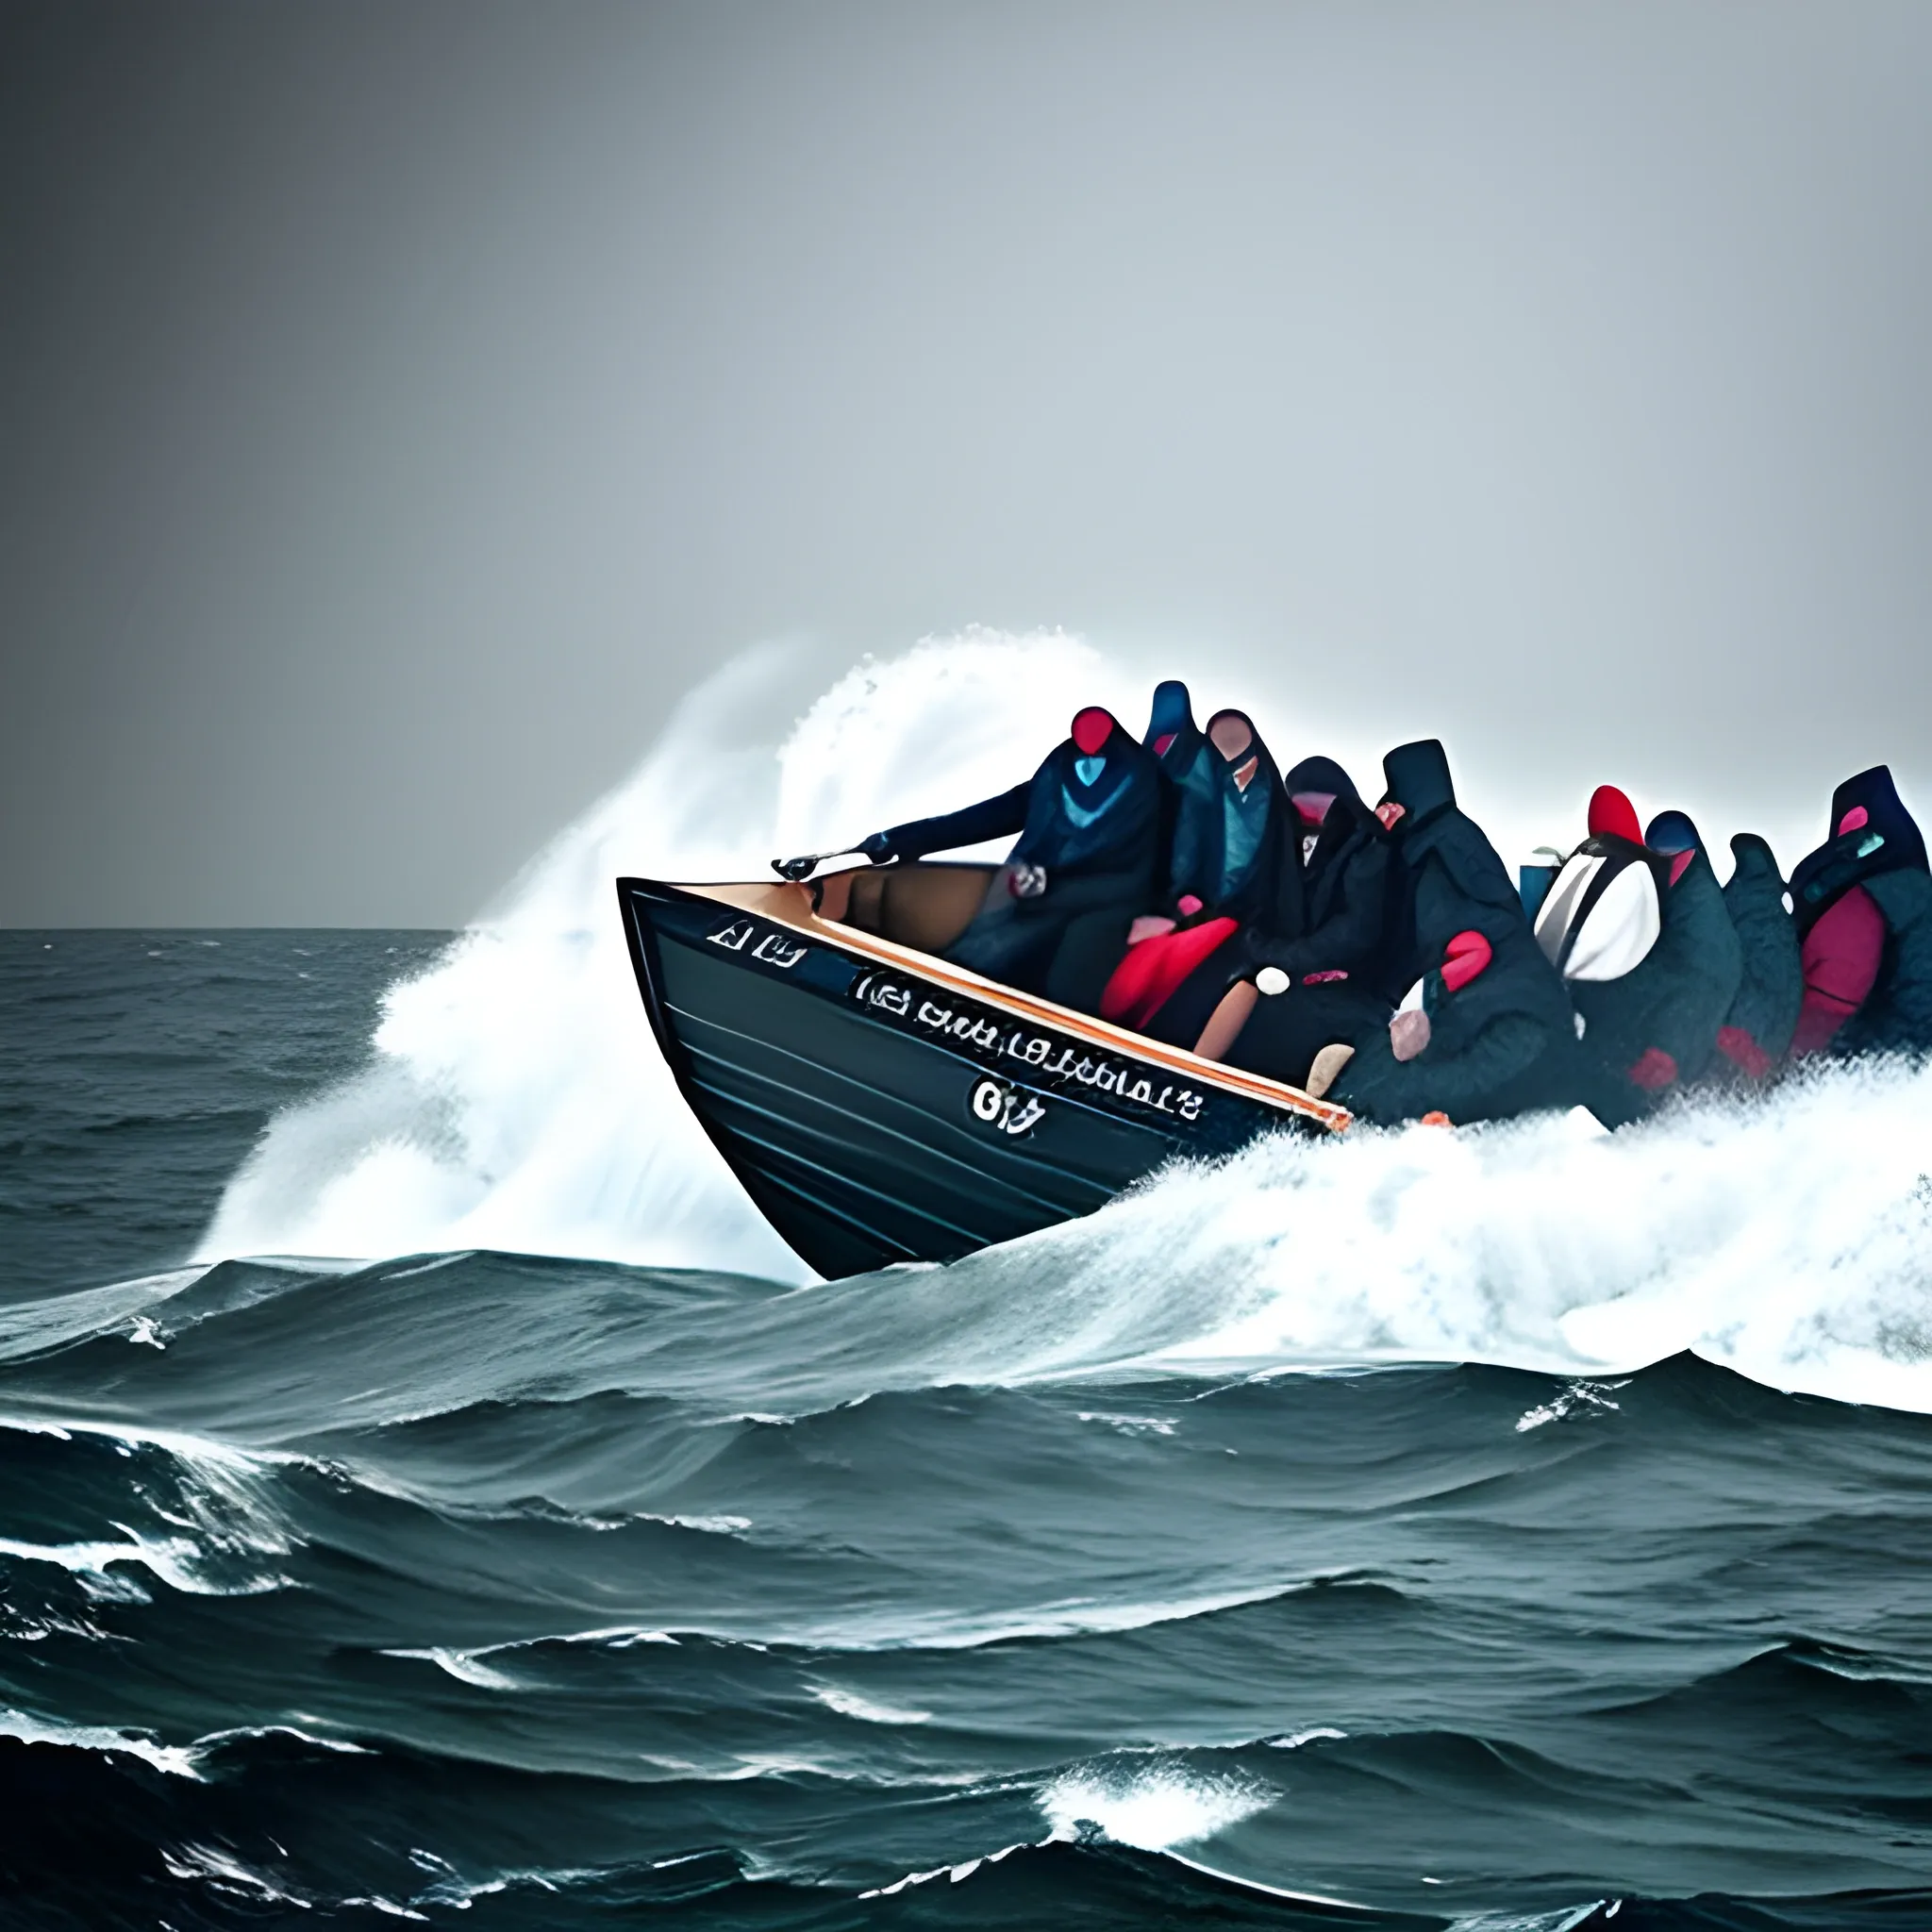 ghost migrants on a small boat on the stormy sea, photography